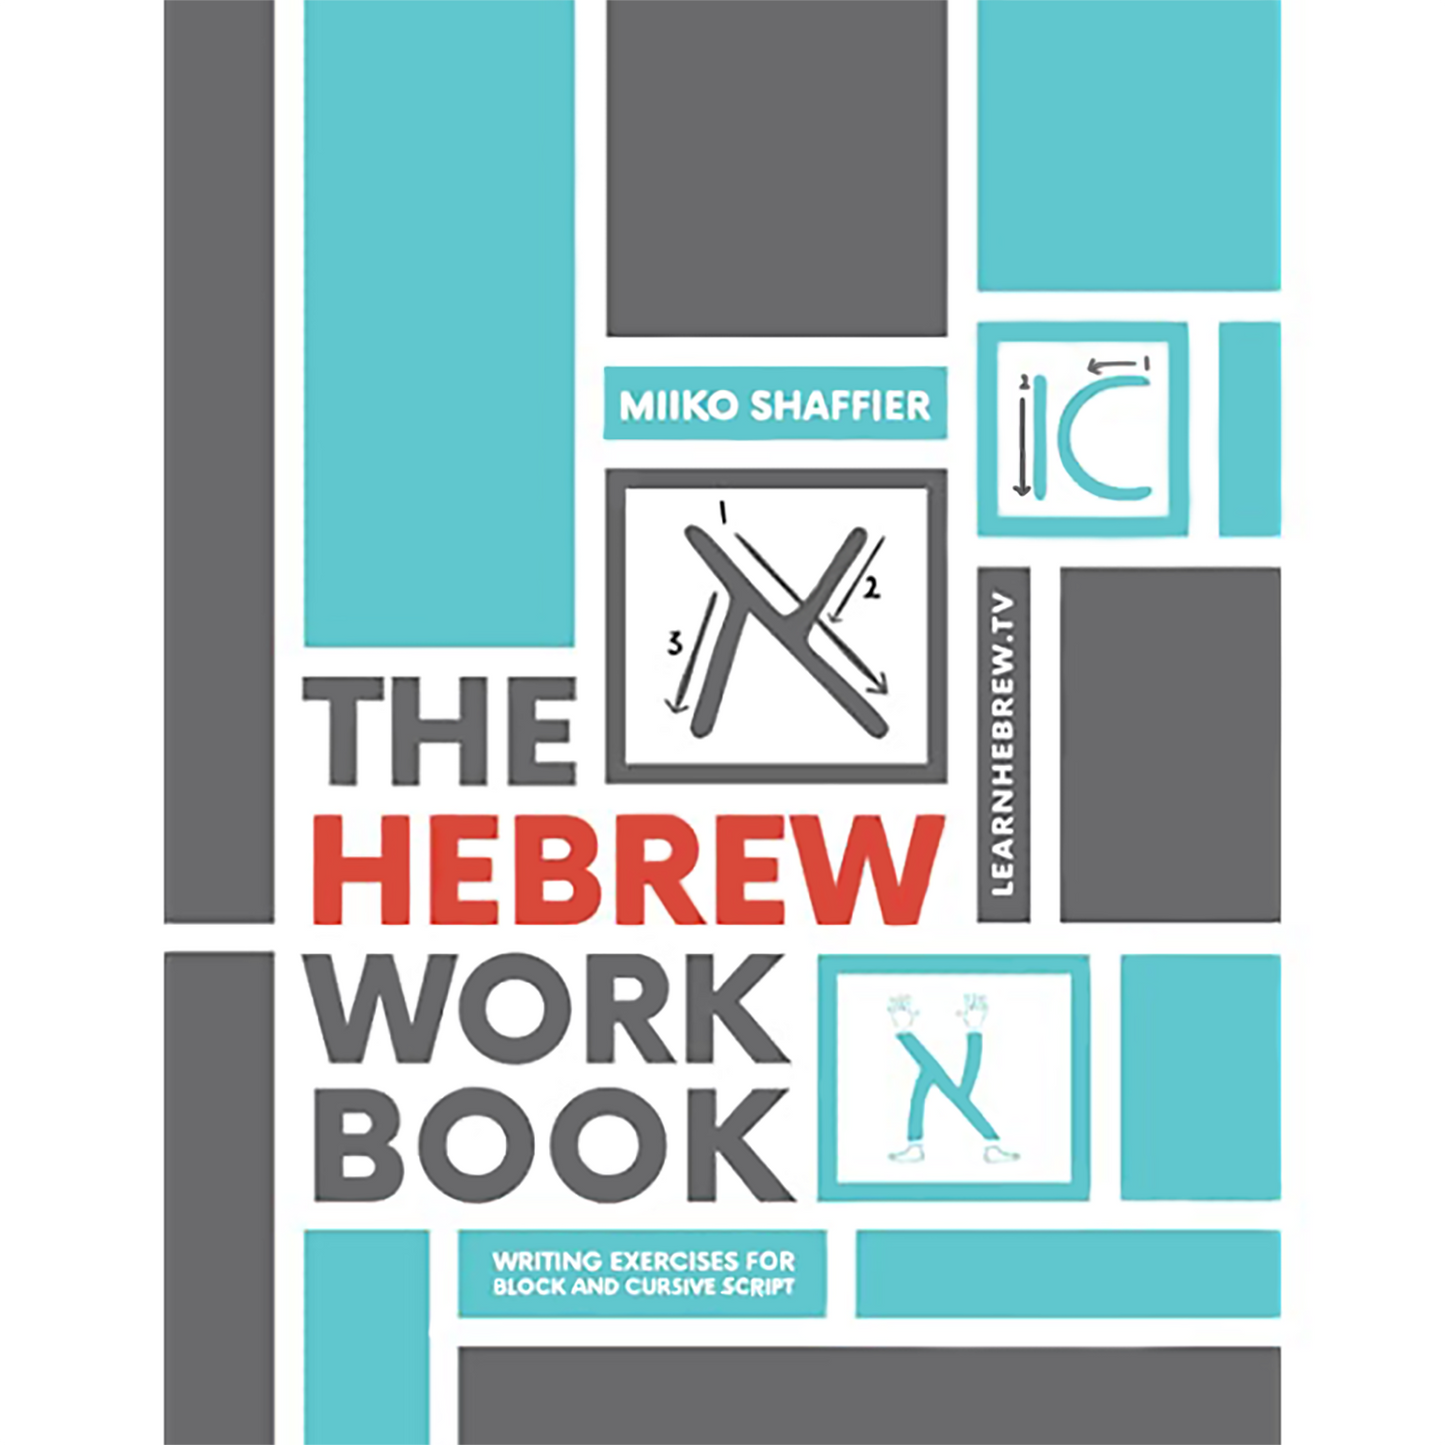 work book that teaches the hebrew language including writing exercises by Miiko Shaffier